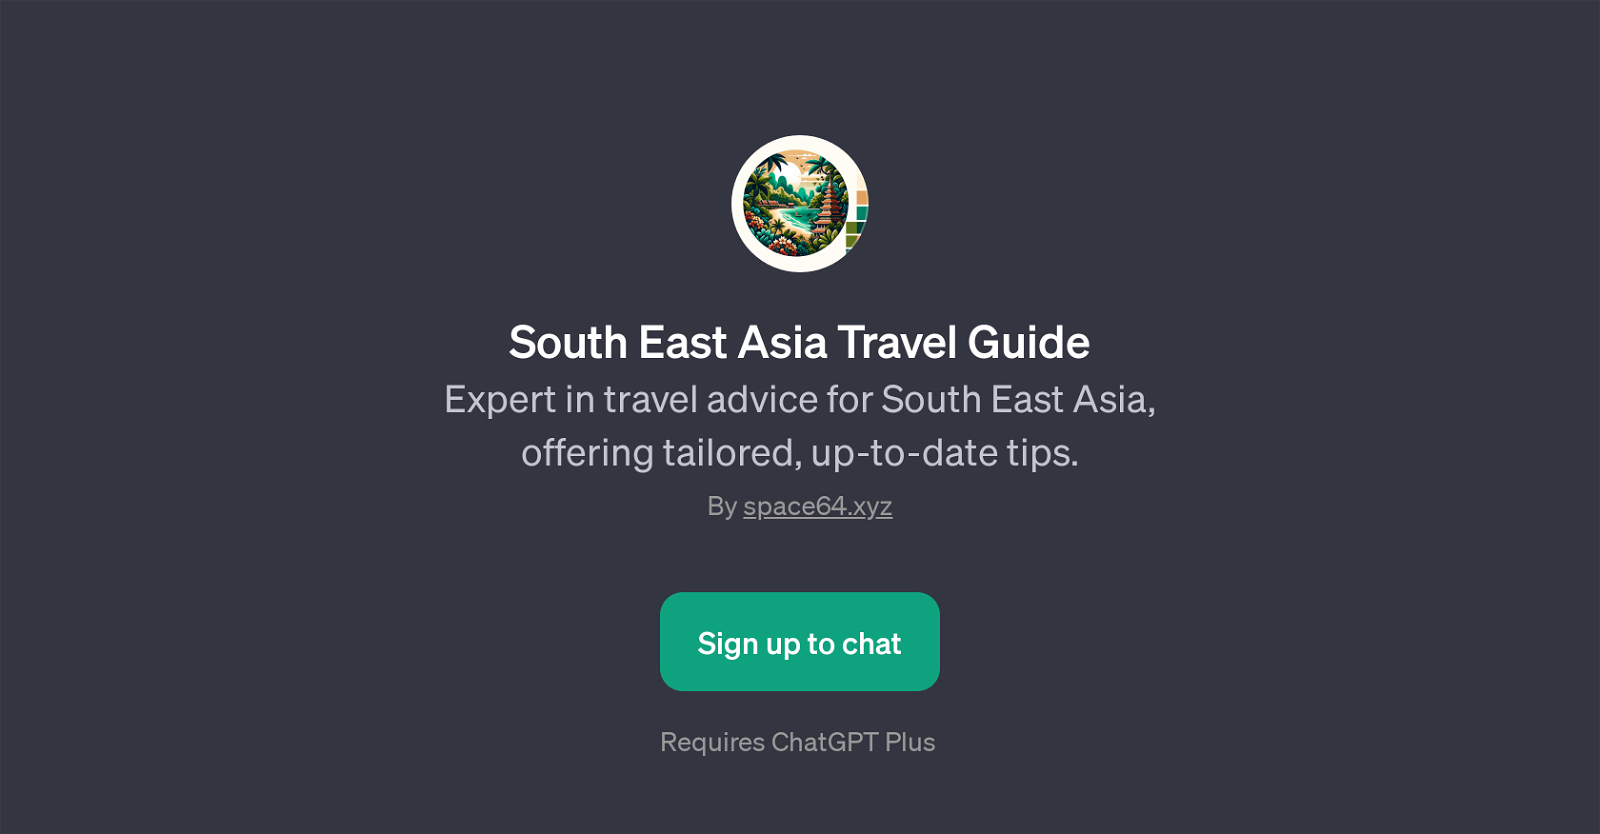 South East Asia Travel Guide website